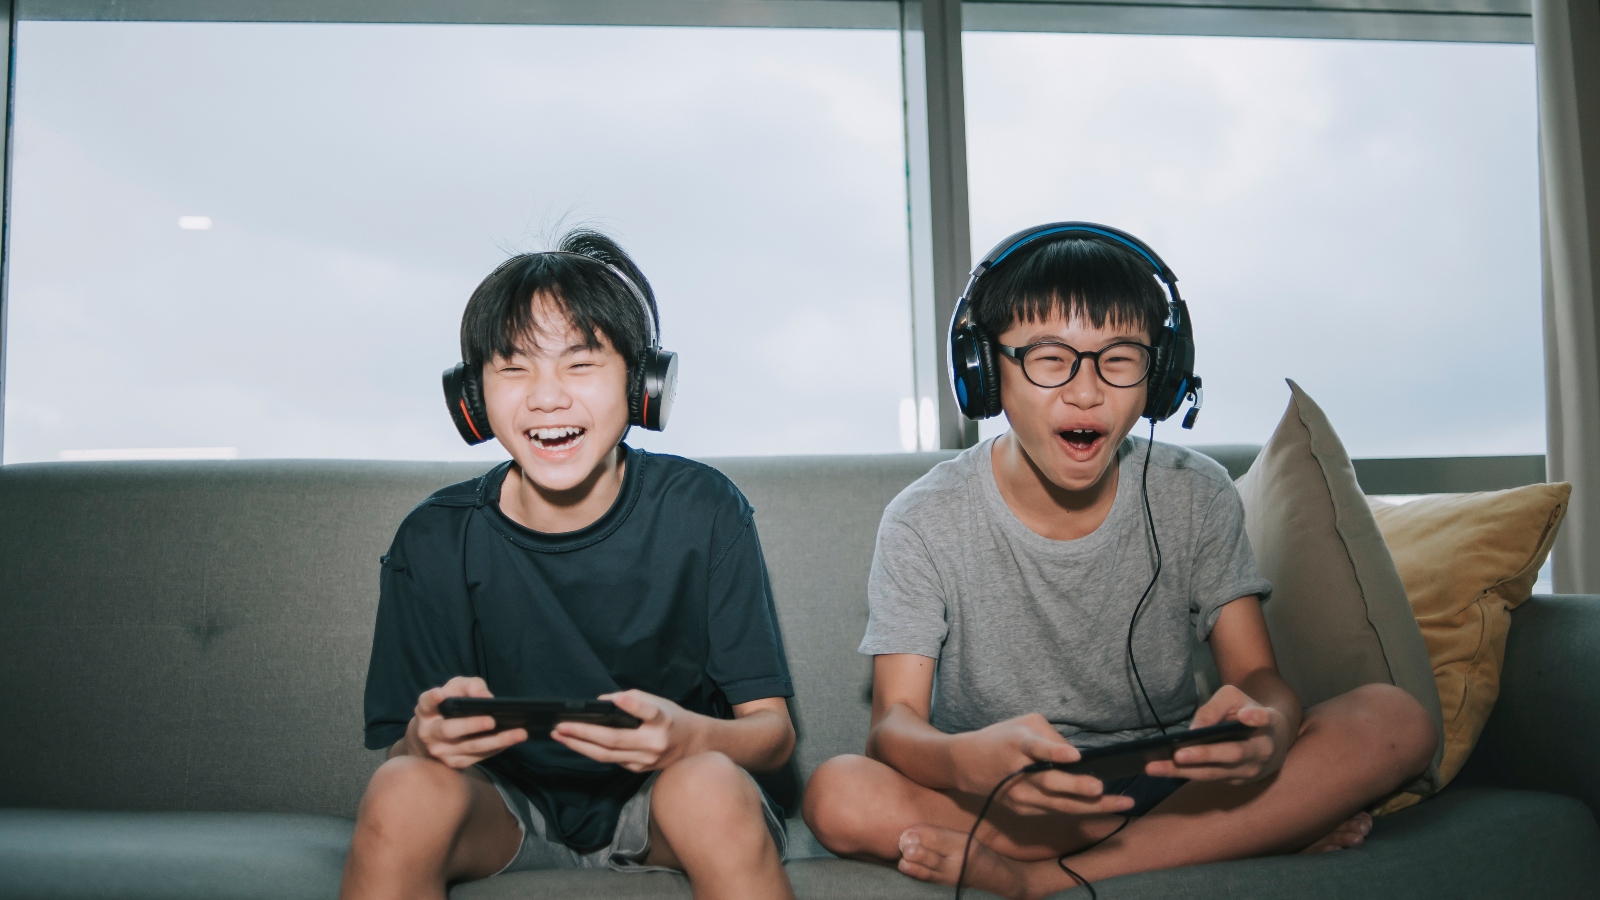 Two Asian brothers playing video games on a couch